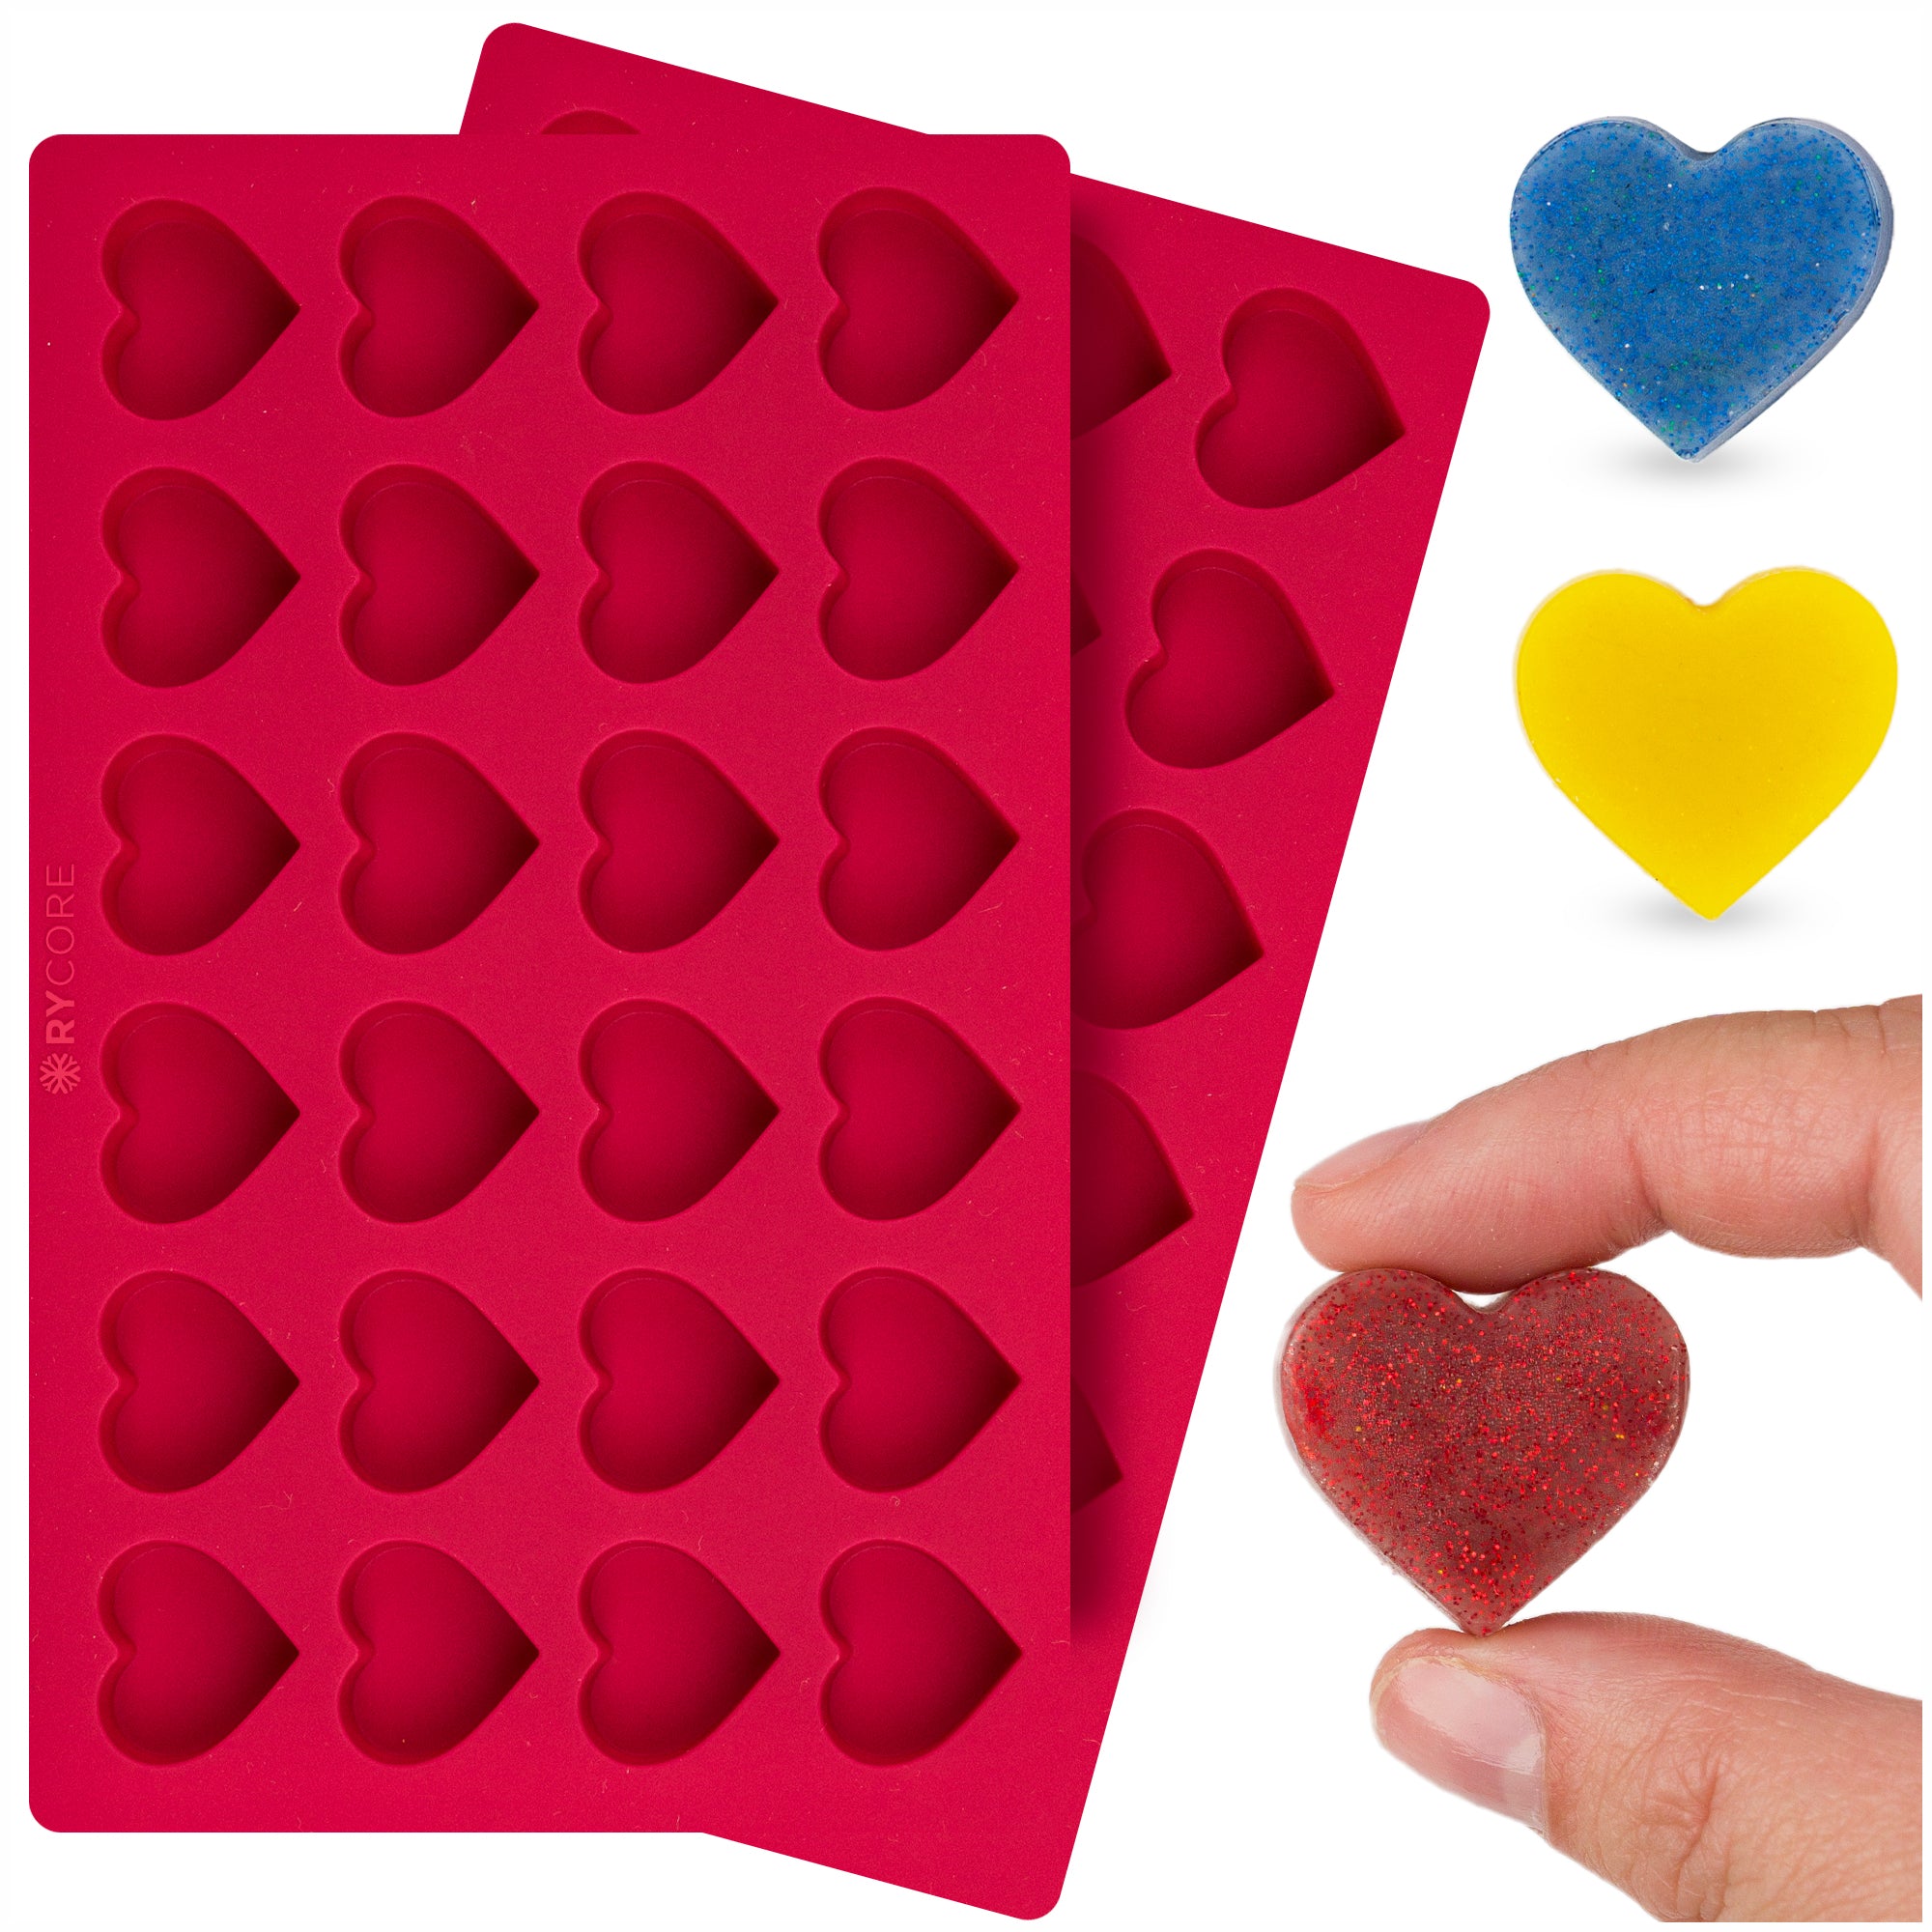 Silicone Heart Mold | Silicone Molds for Crafting Chocolates, Candies | 2  Pack